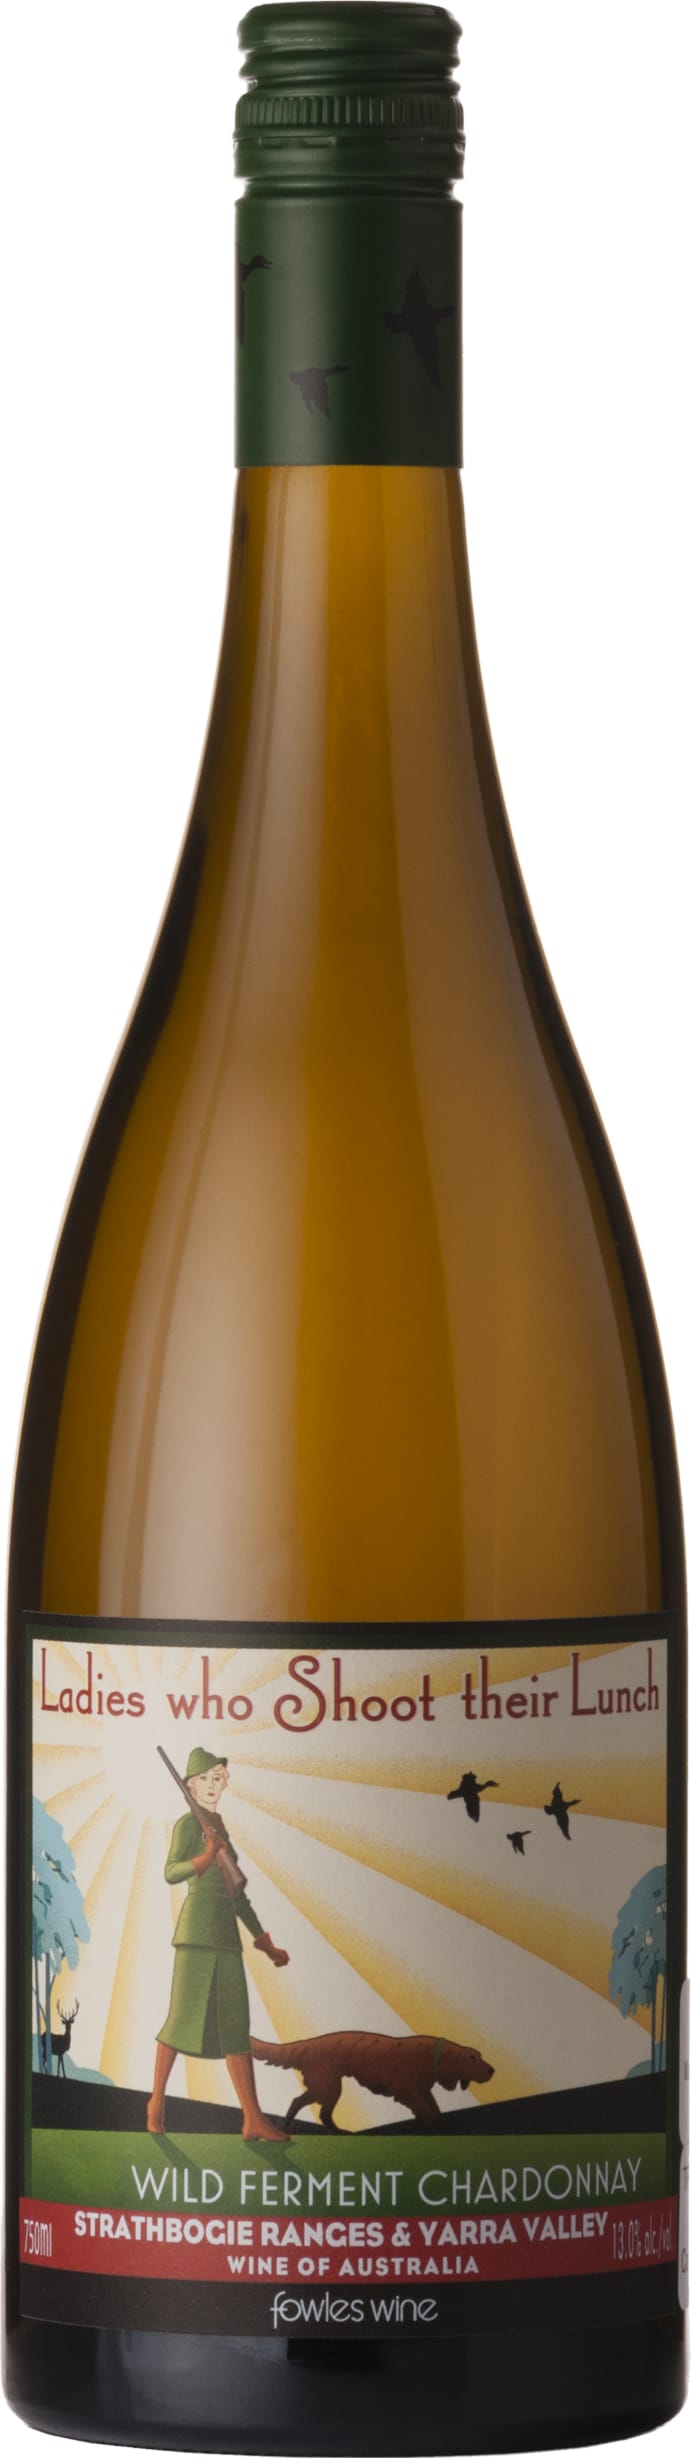 Fowles Wine Ladies who Shoot their Lunch Chardonnay 2021 75cl - Buy Fowles Wine Wines from GREAT WINES DIRECT wine shop